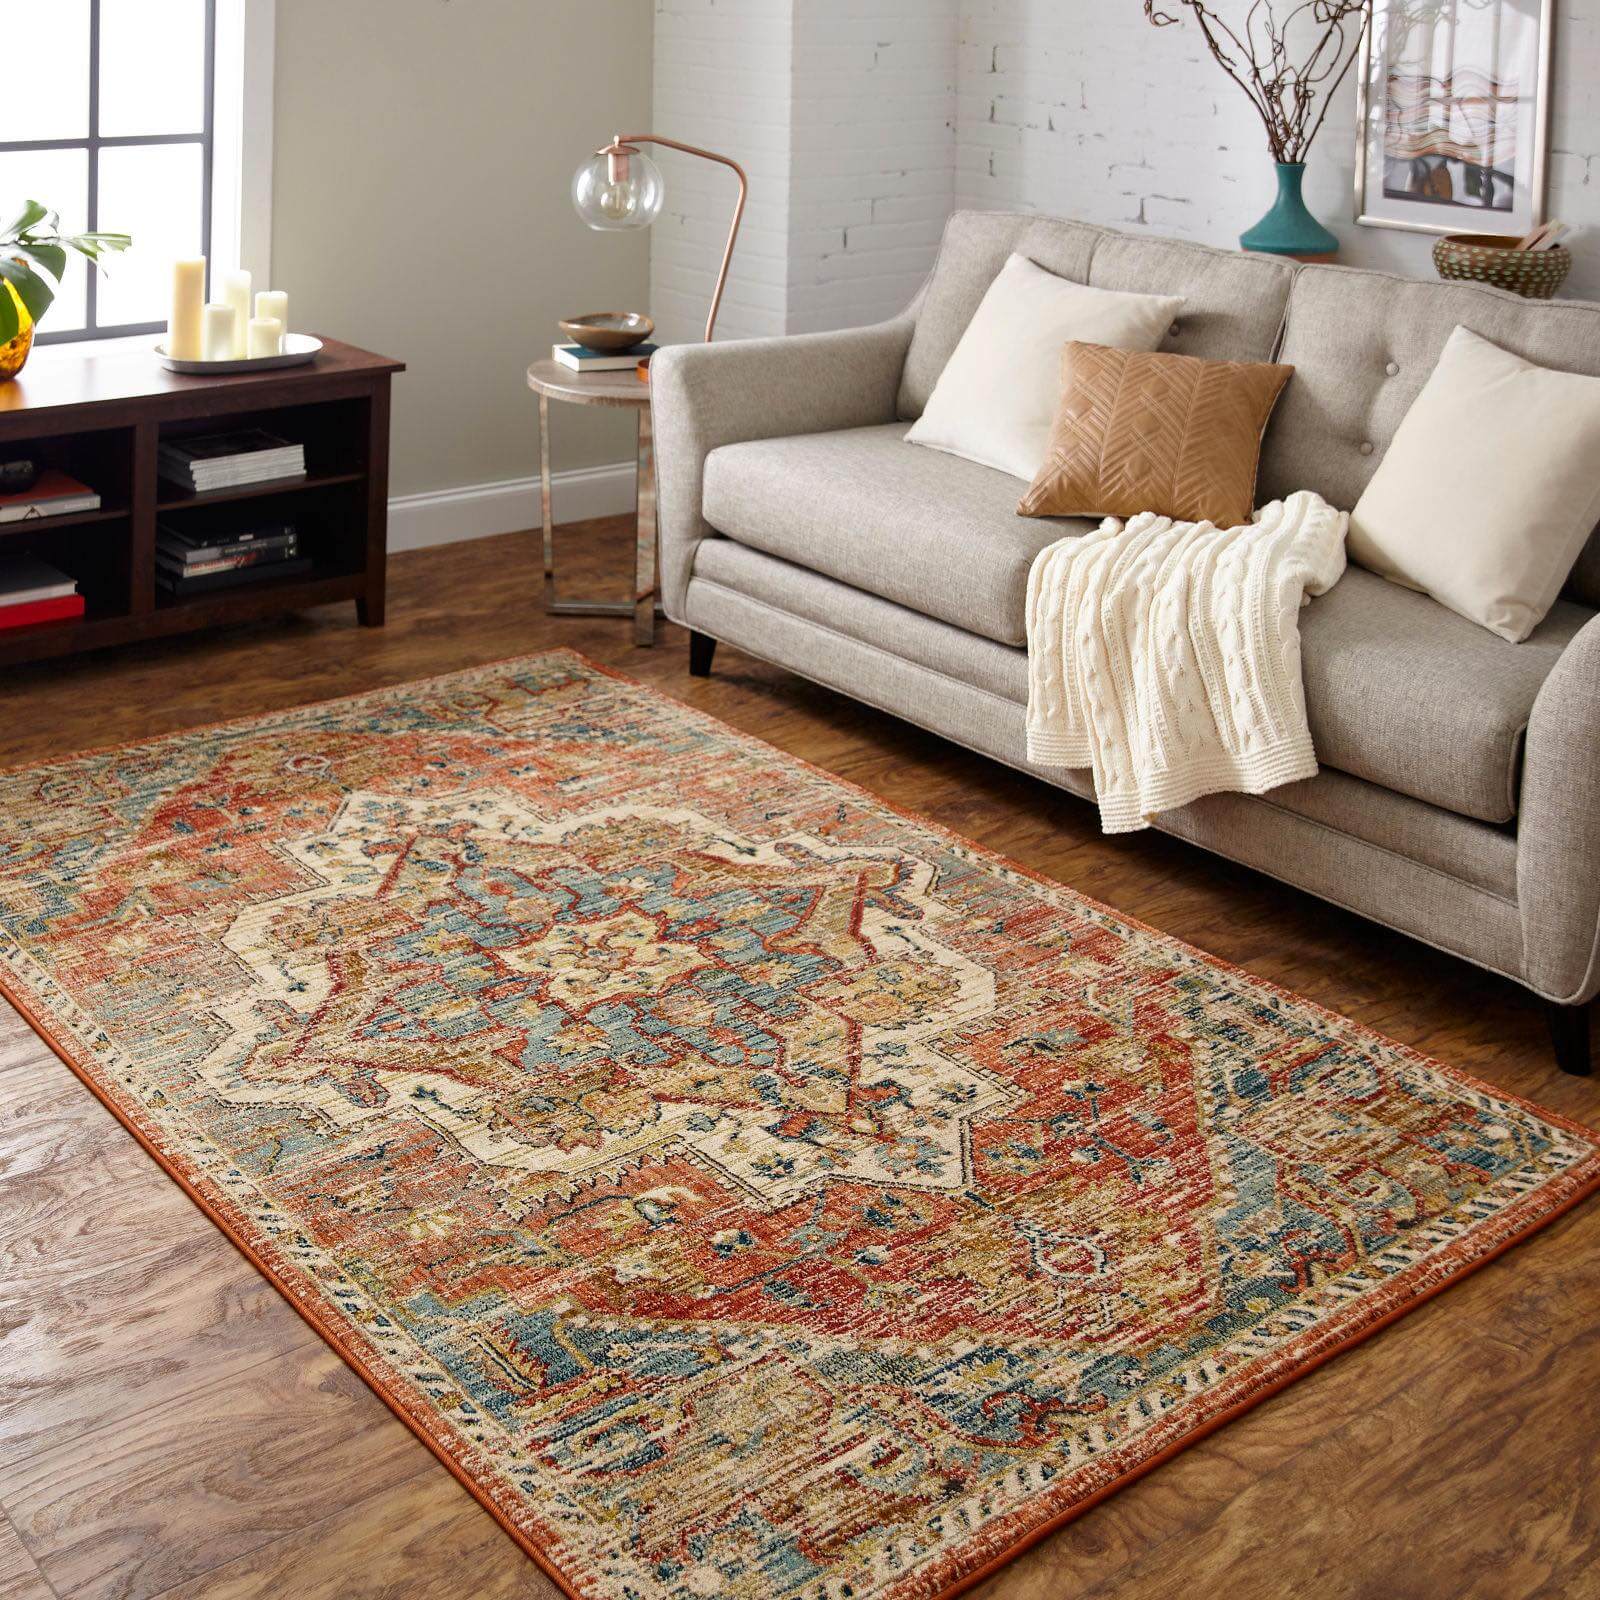 Area rug for living room | Sarmazian Brothers Flooring